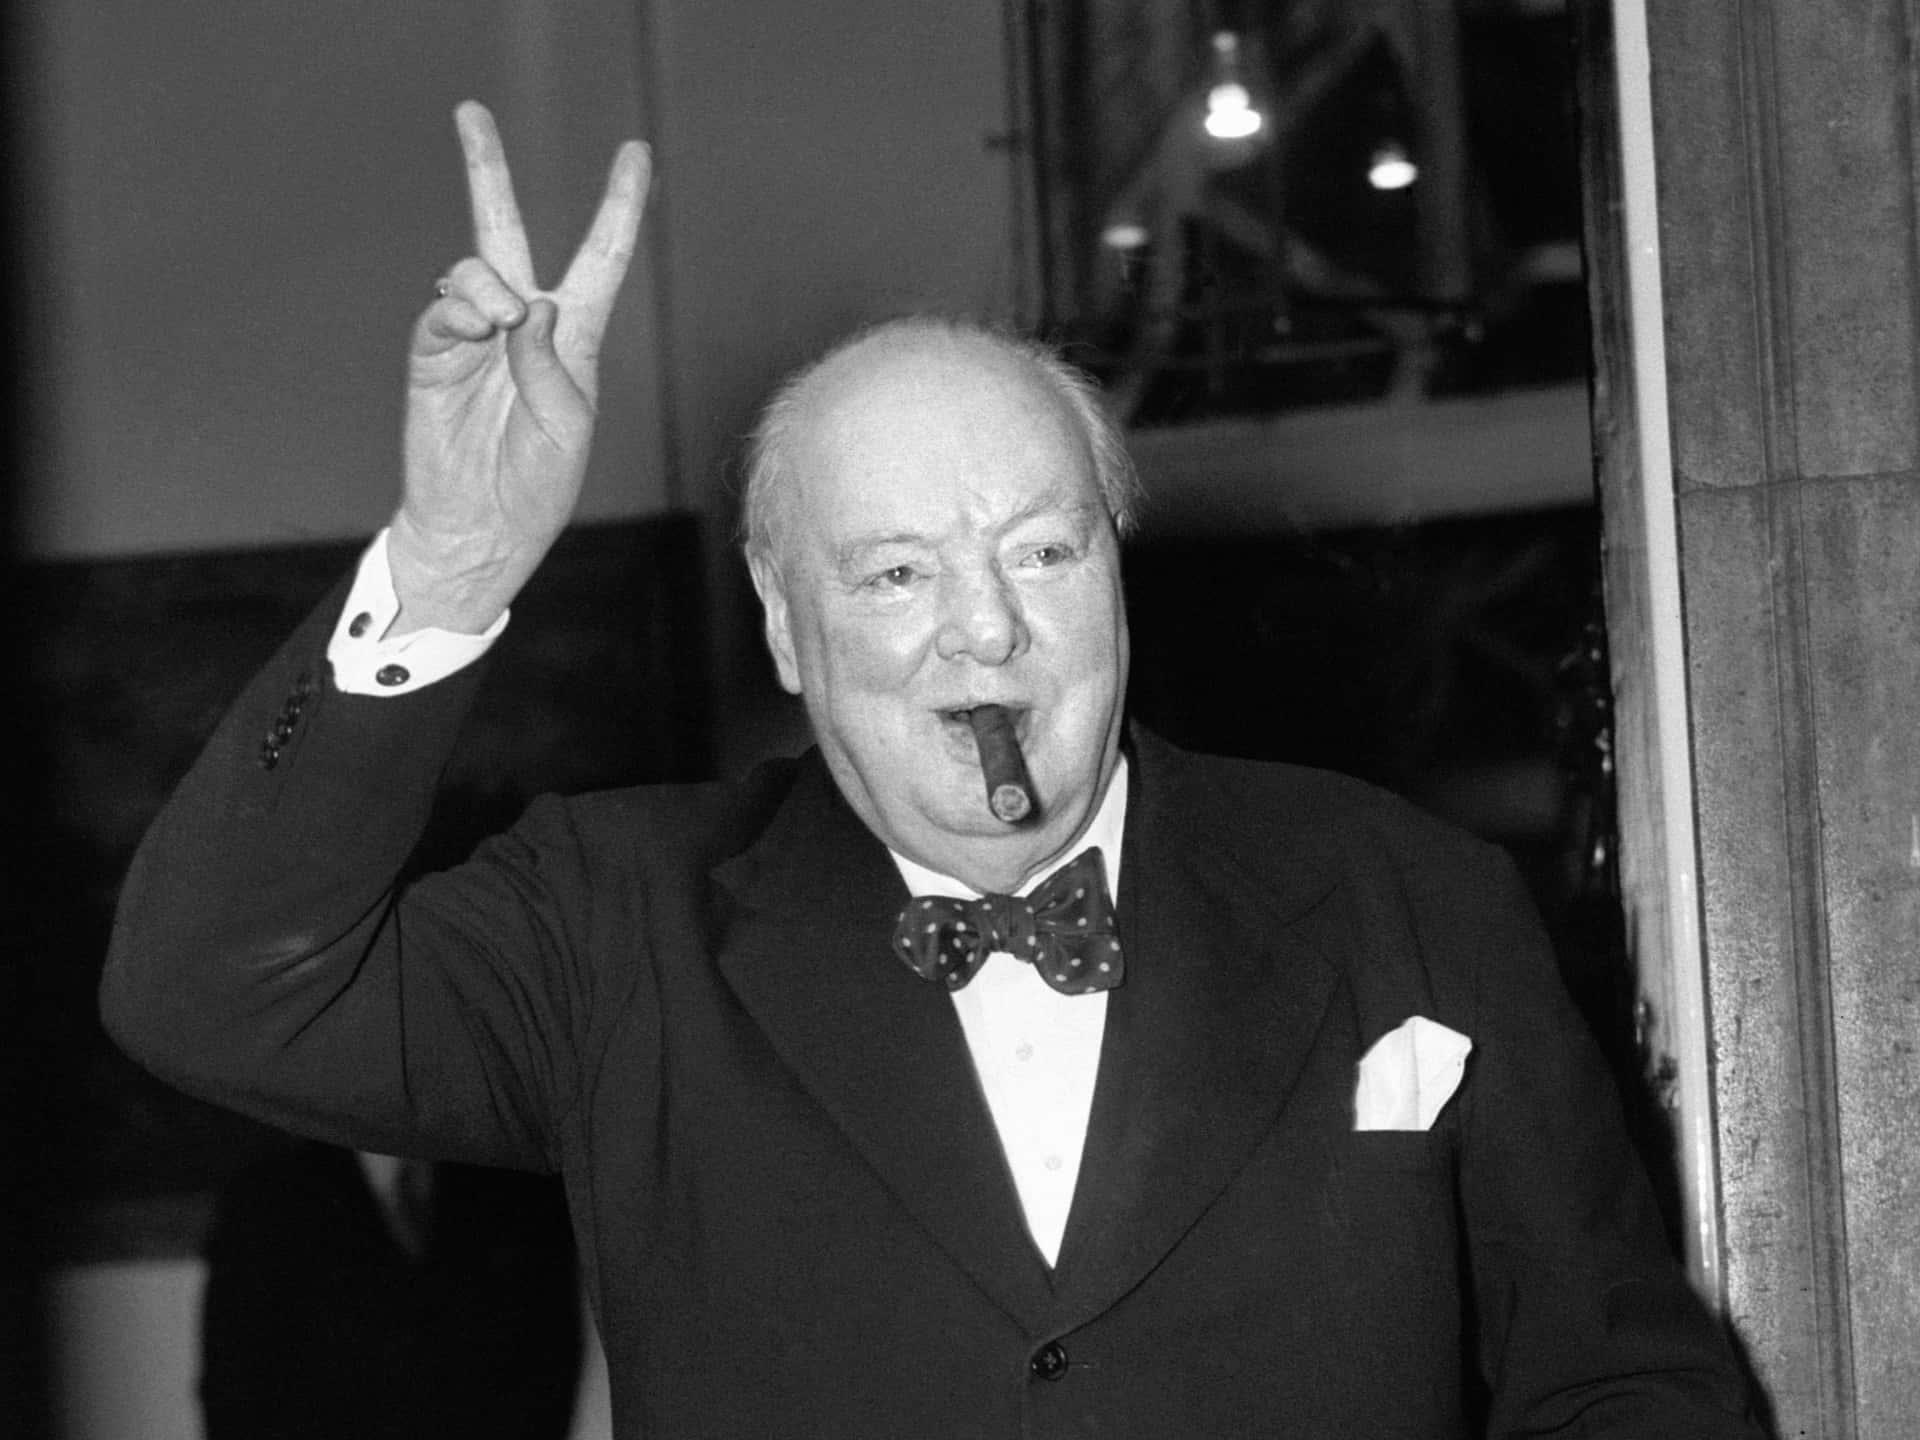 A Man In A Suit Is Making A Peace Sign